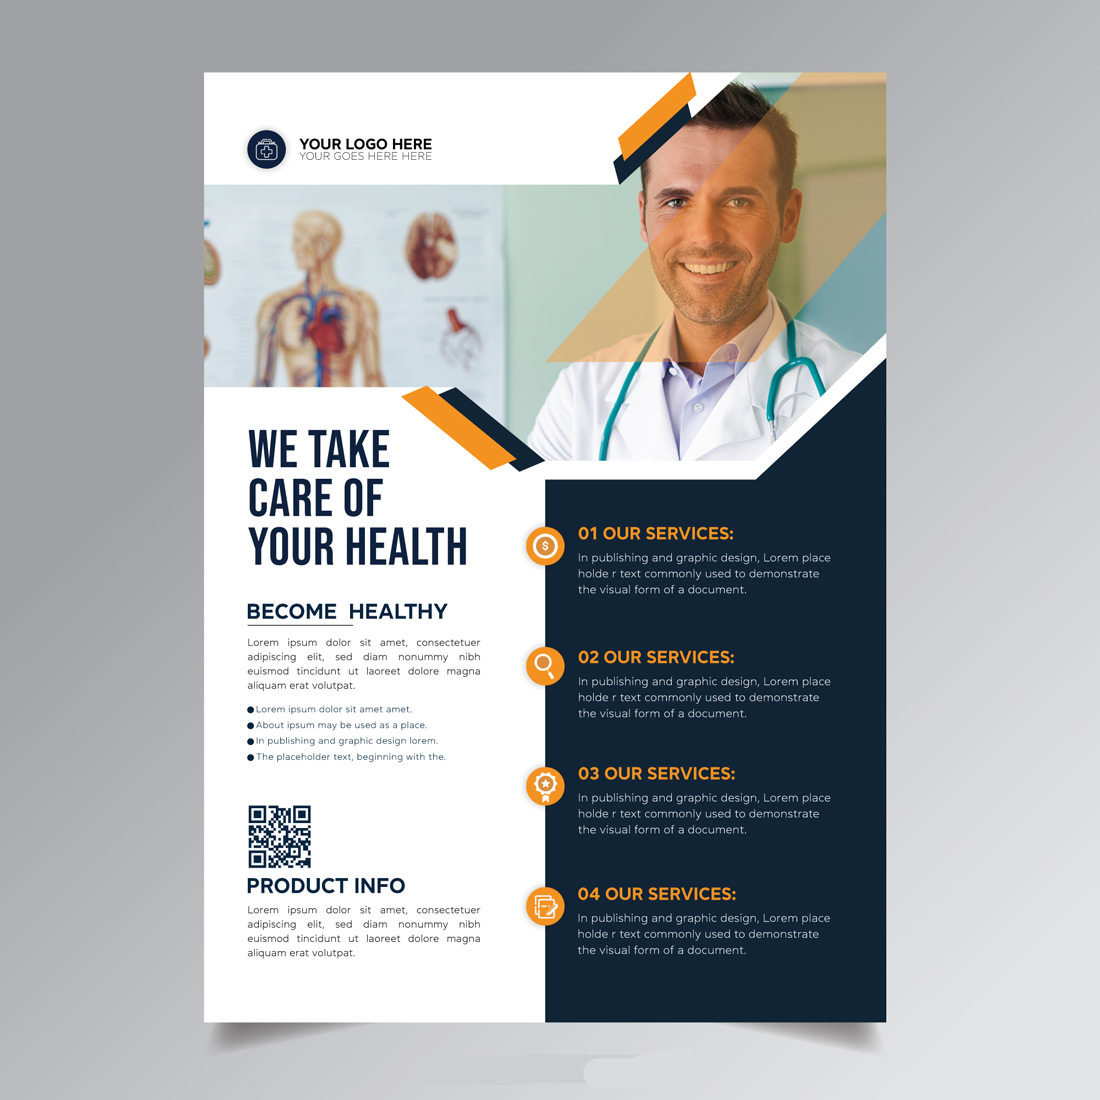 Medical brochure with an image of a doctor.